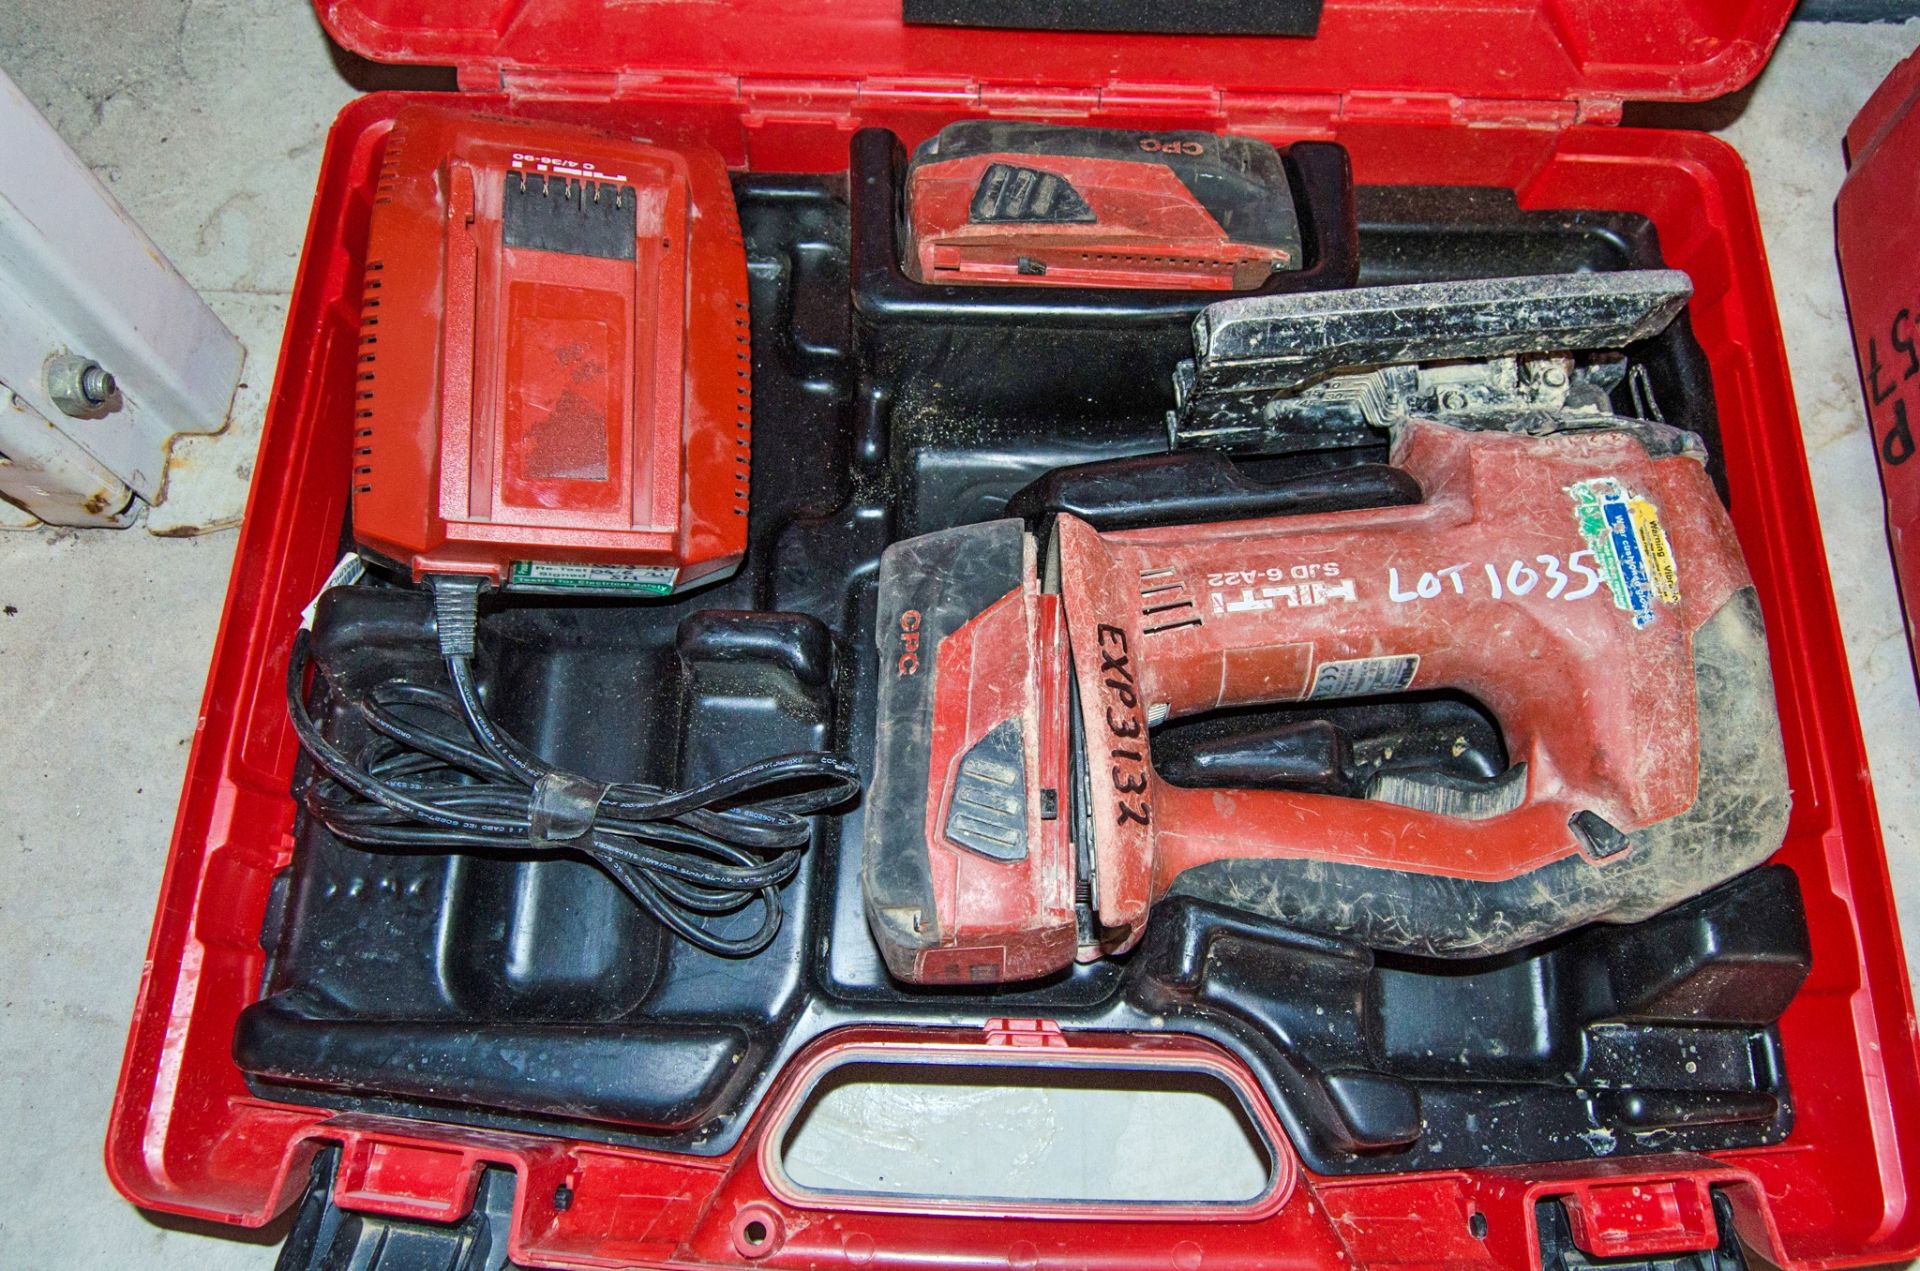 Hilti SJD 6-A22 22v cordless jigsaw c/w 2 batteries, charger and carry case EXP3132